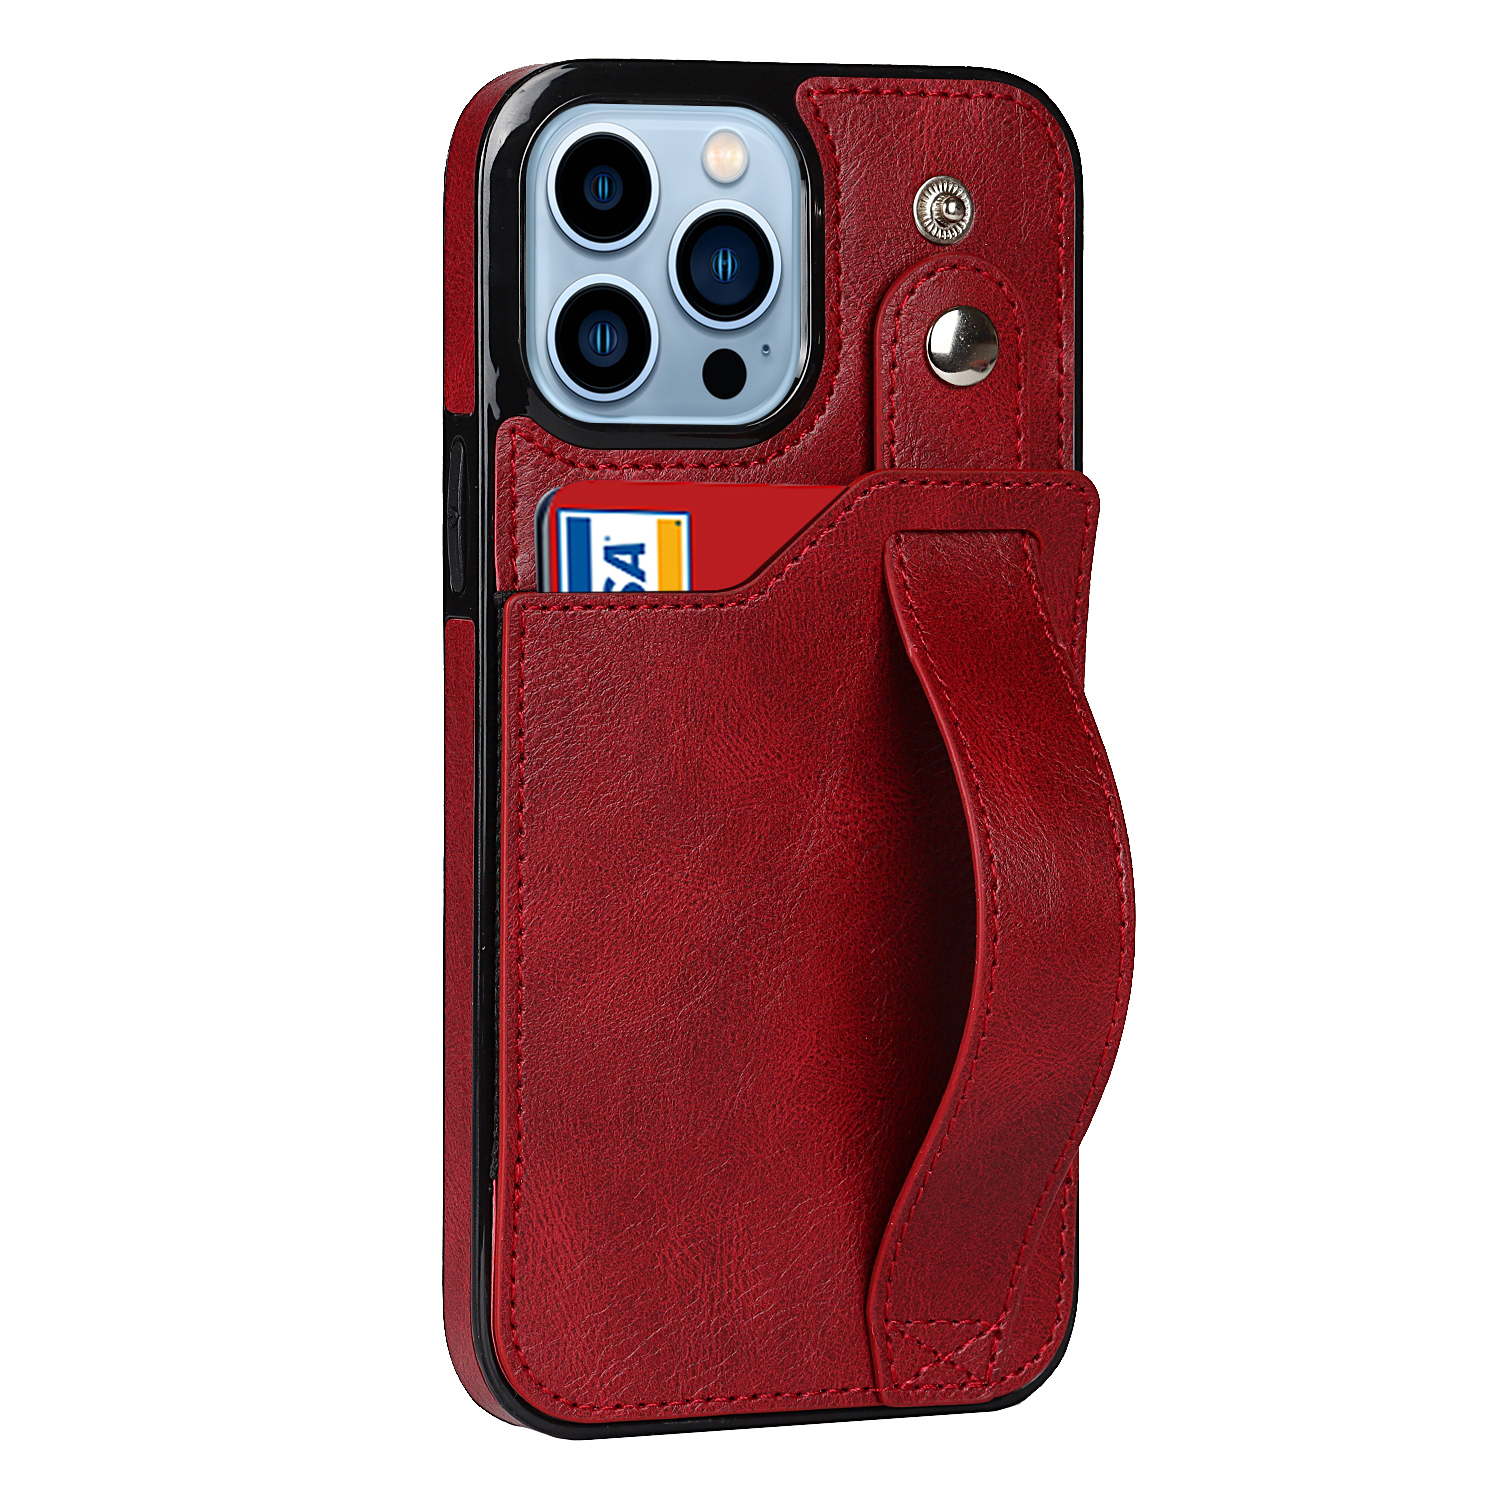 Samsung Galaxy A22 5G Back Cover Hoesje met Handvat - leer- Handvat - Backcover - Samsung Galaxy A22 5G - Rood